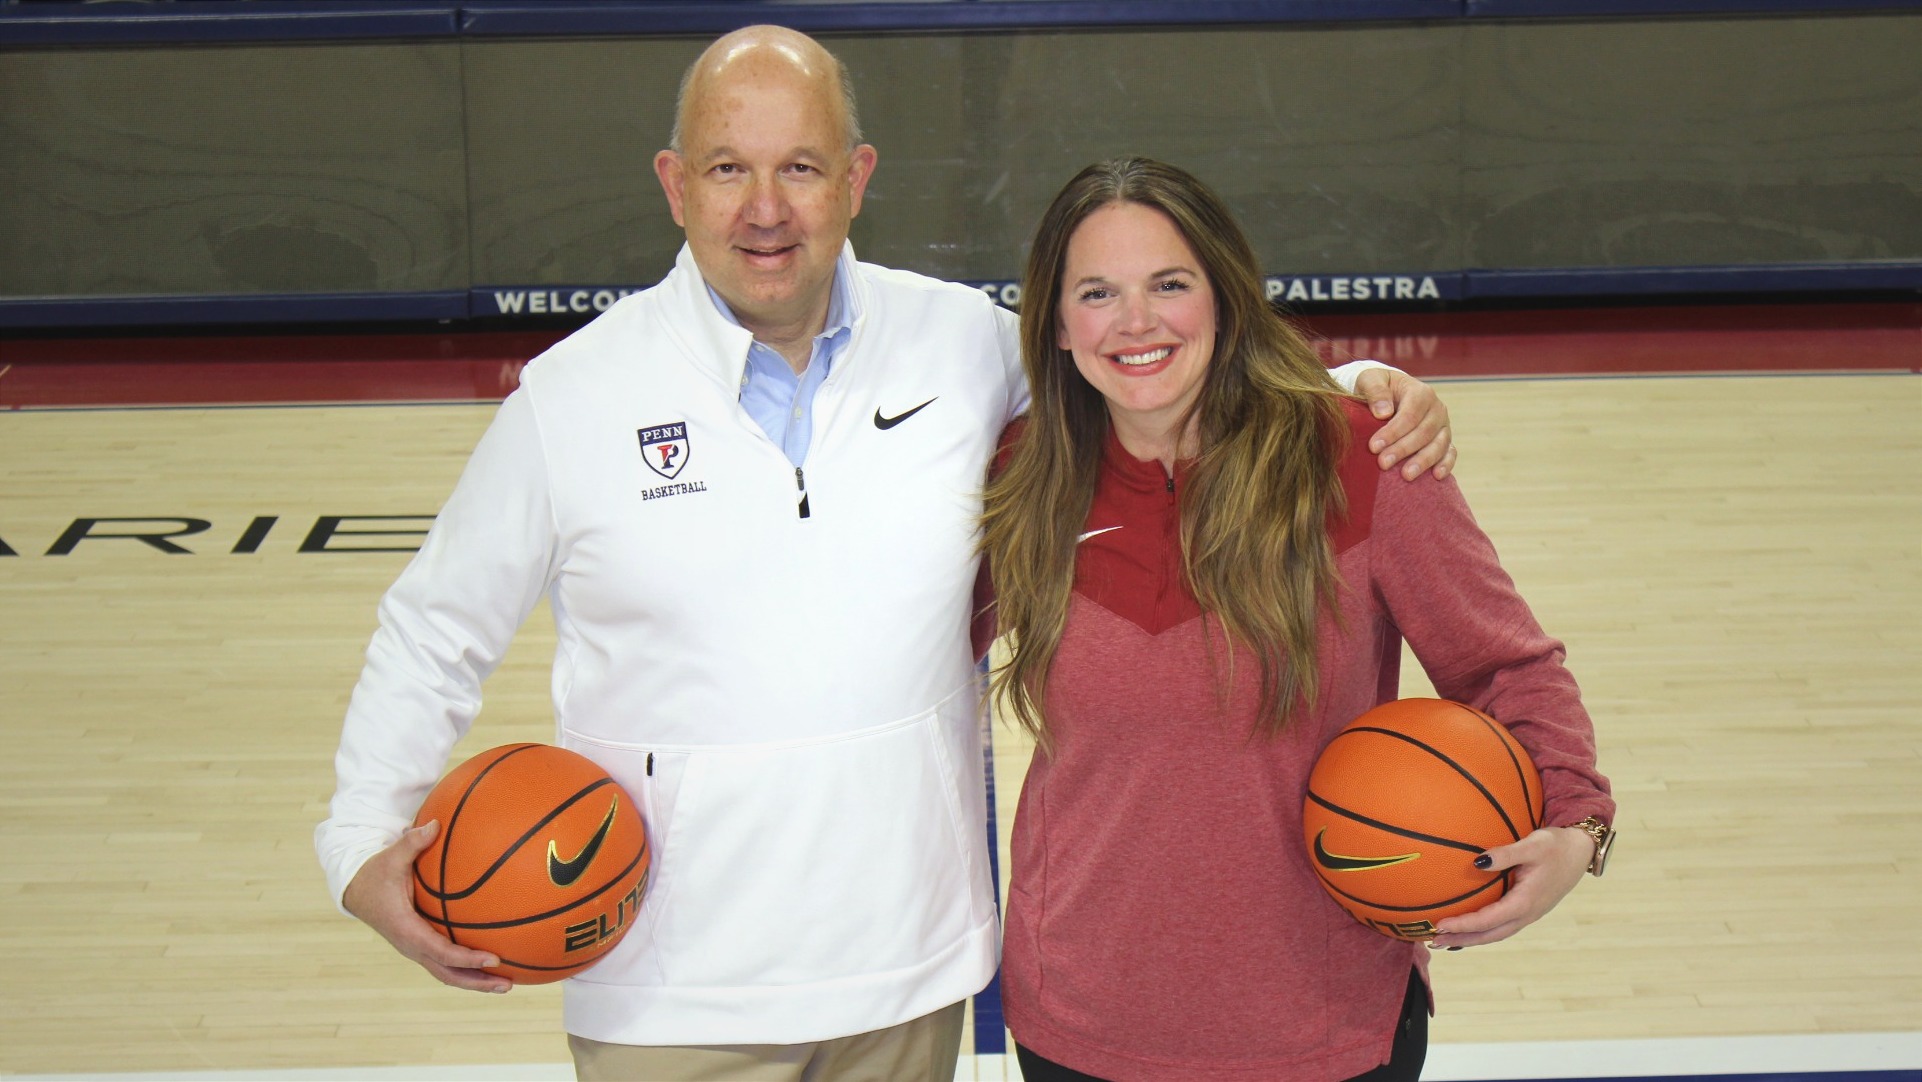 John Di Paolo and Kelly Killion smiling and standing arm-and-arm on the court celebrating the announcement.